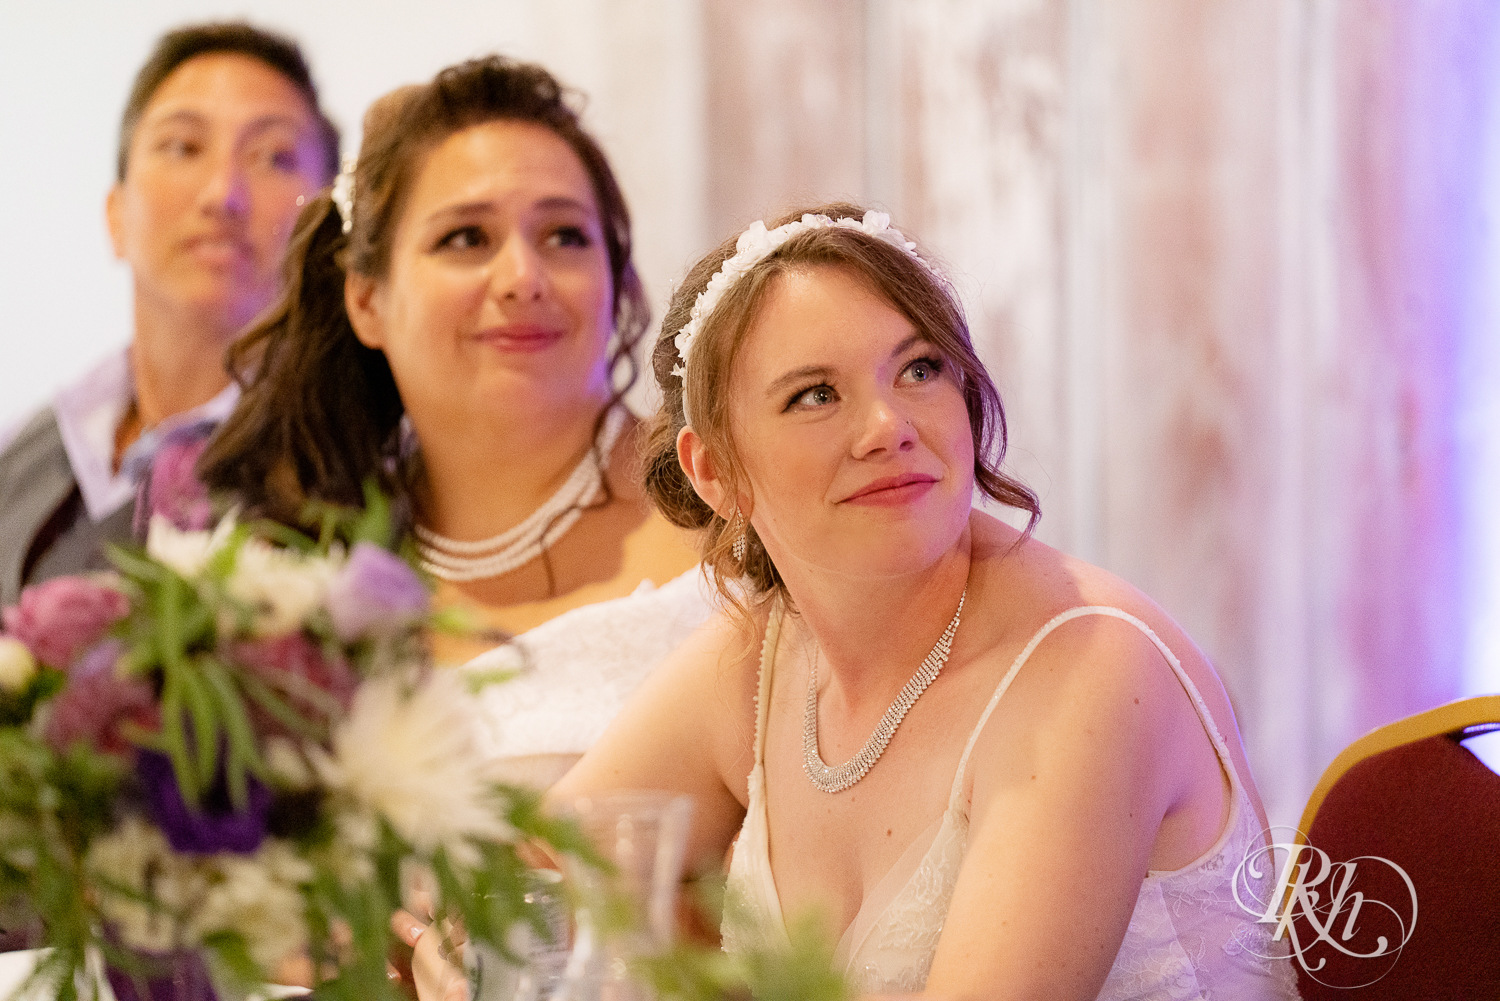 Lesbian brides smile at head table at wedding reception at Willy McCoy's in Champlin, Minnesota.